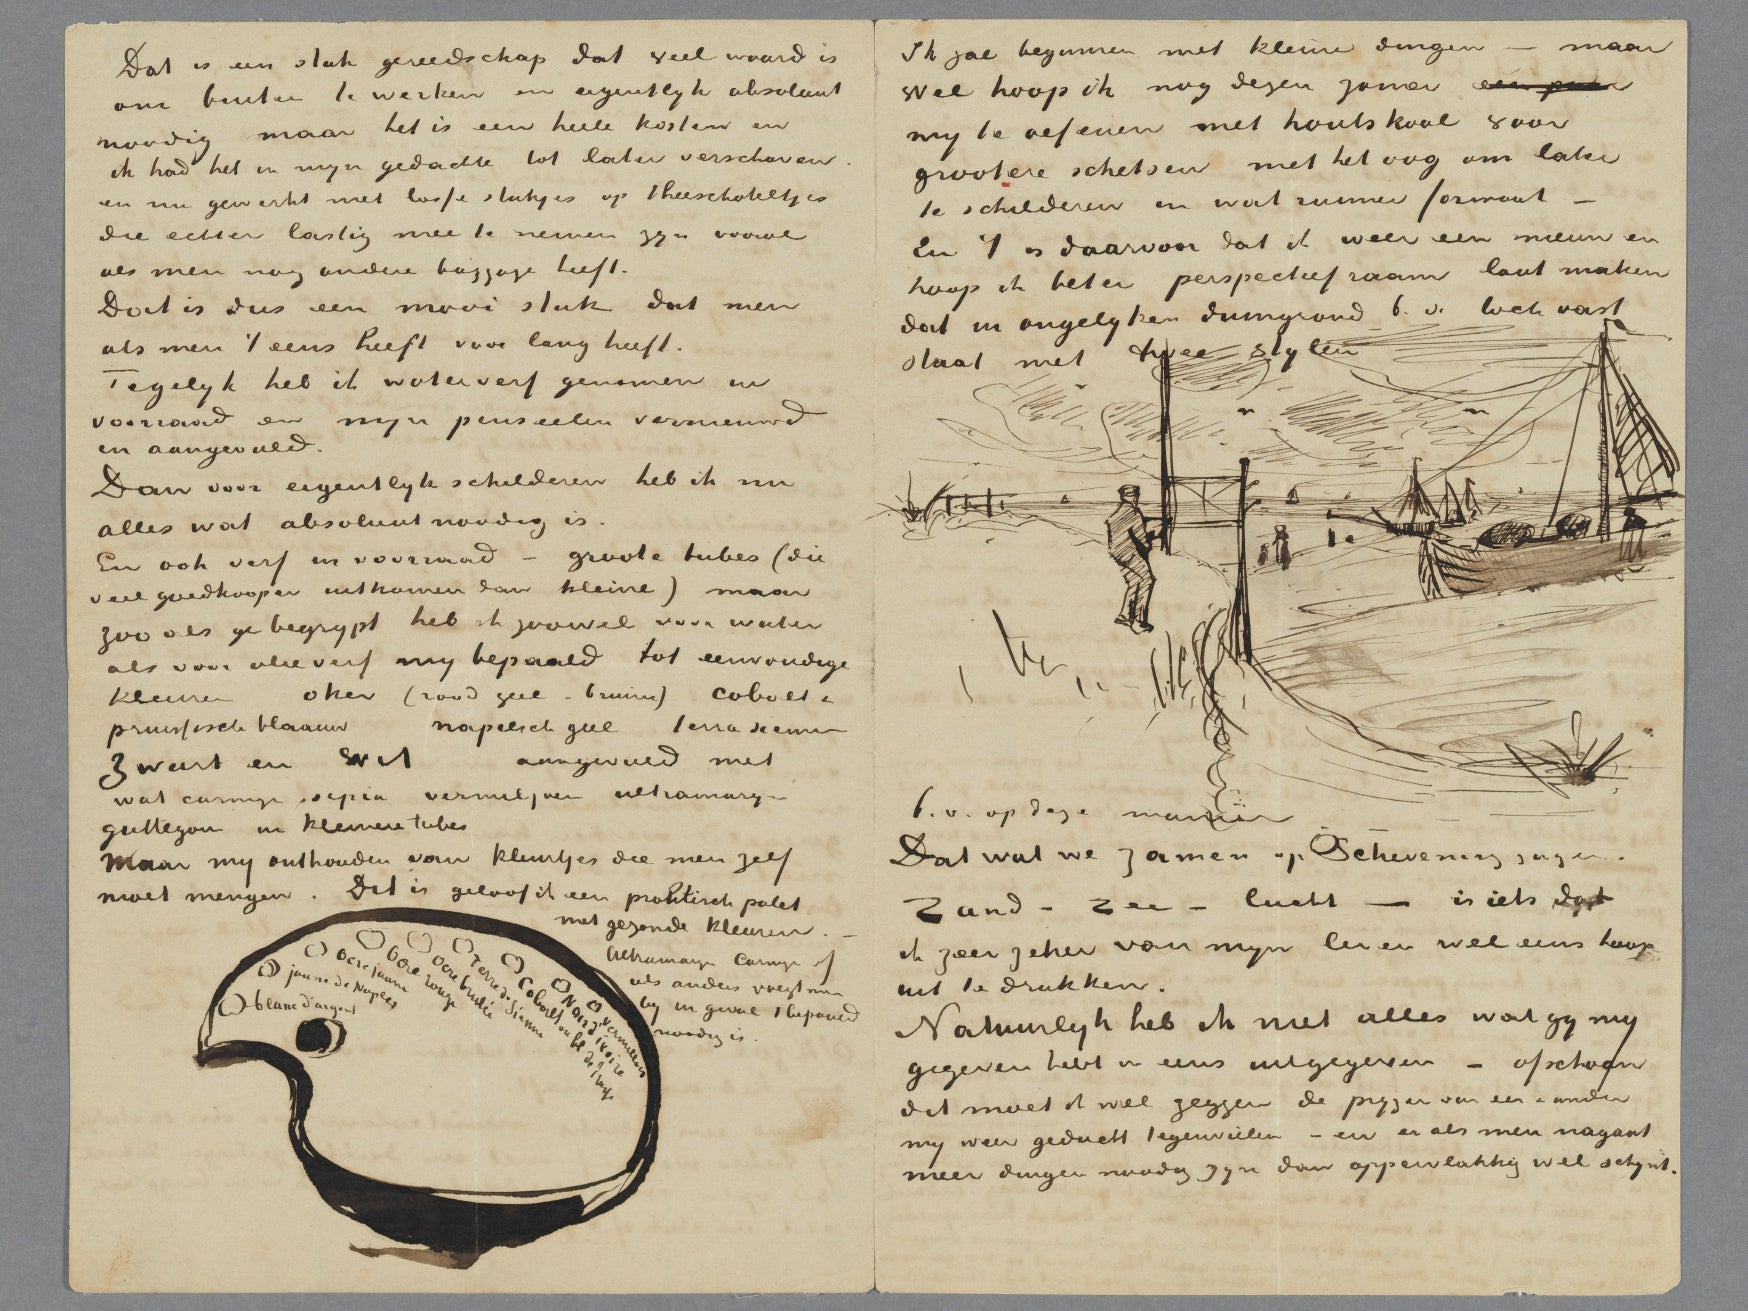 A letter from Van Gogh to his brother Theo, with sketches of a palette and a beach at Scheveningen from August 1882